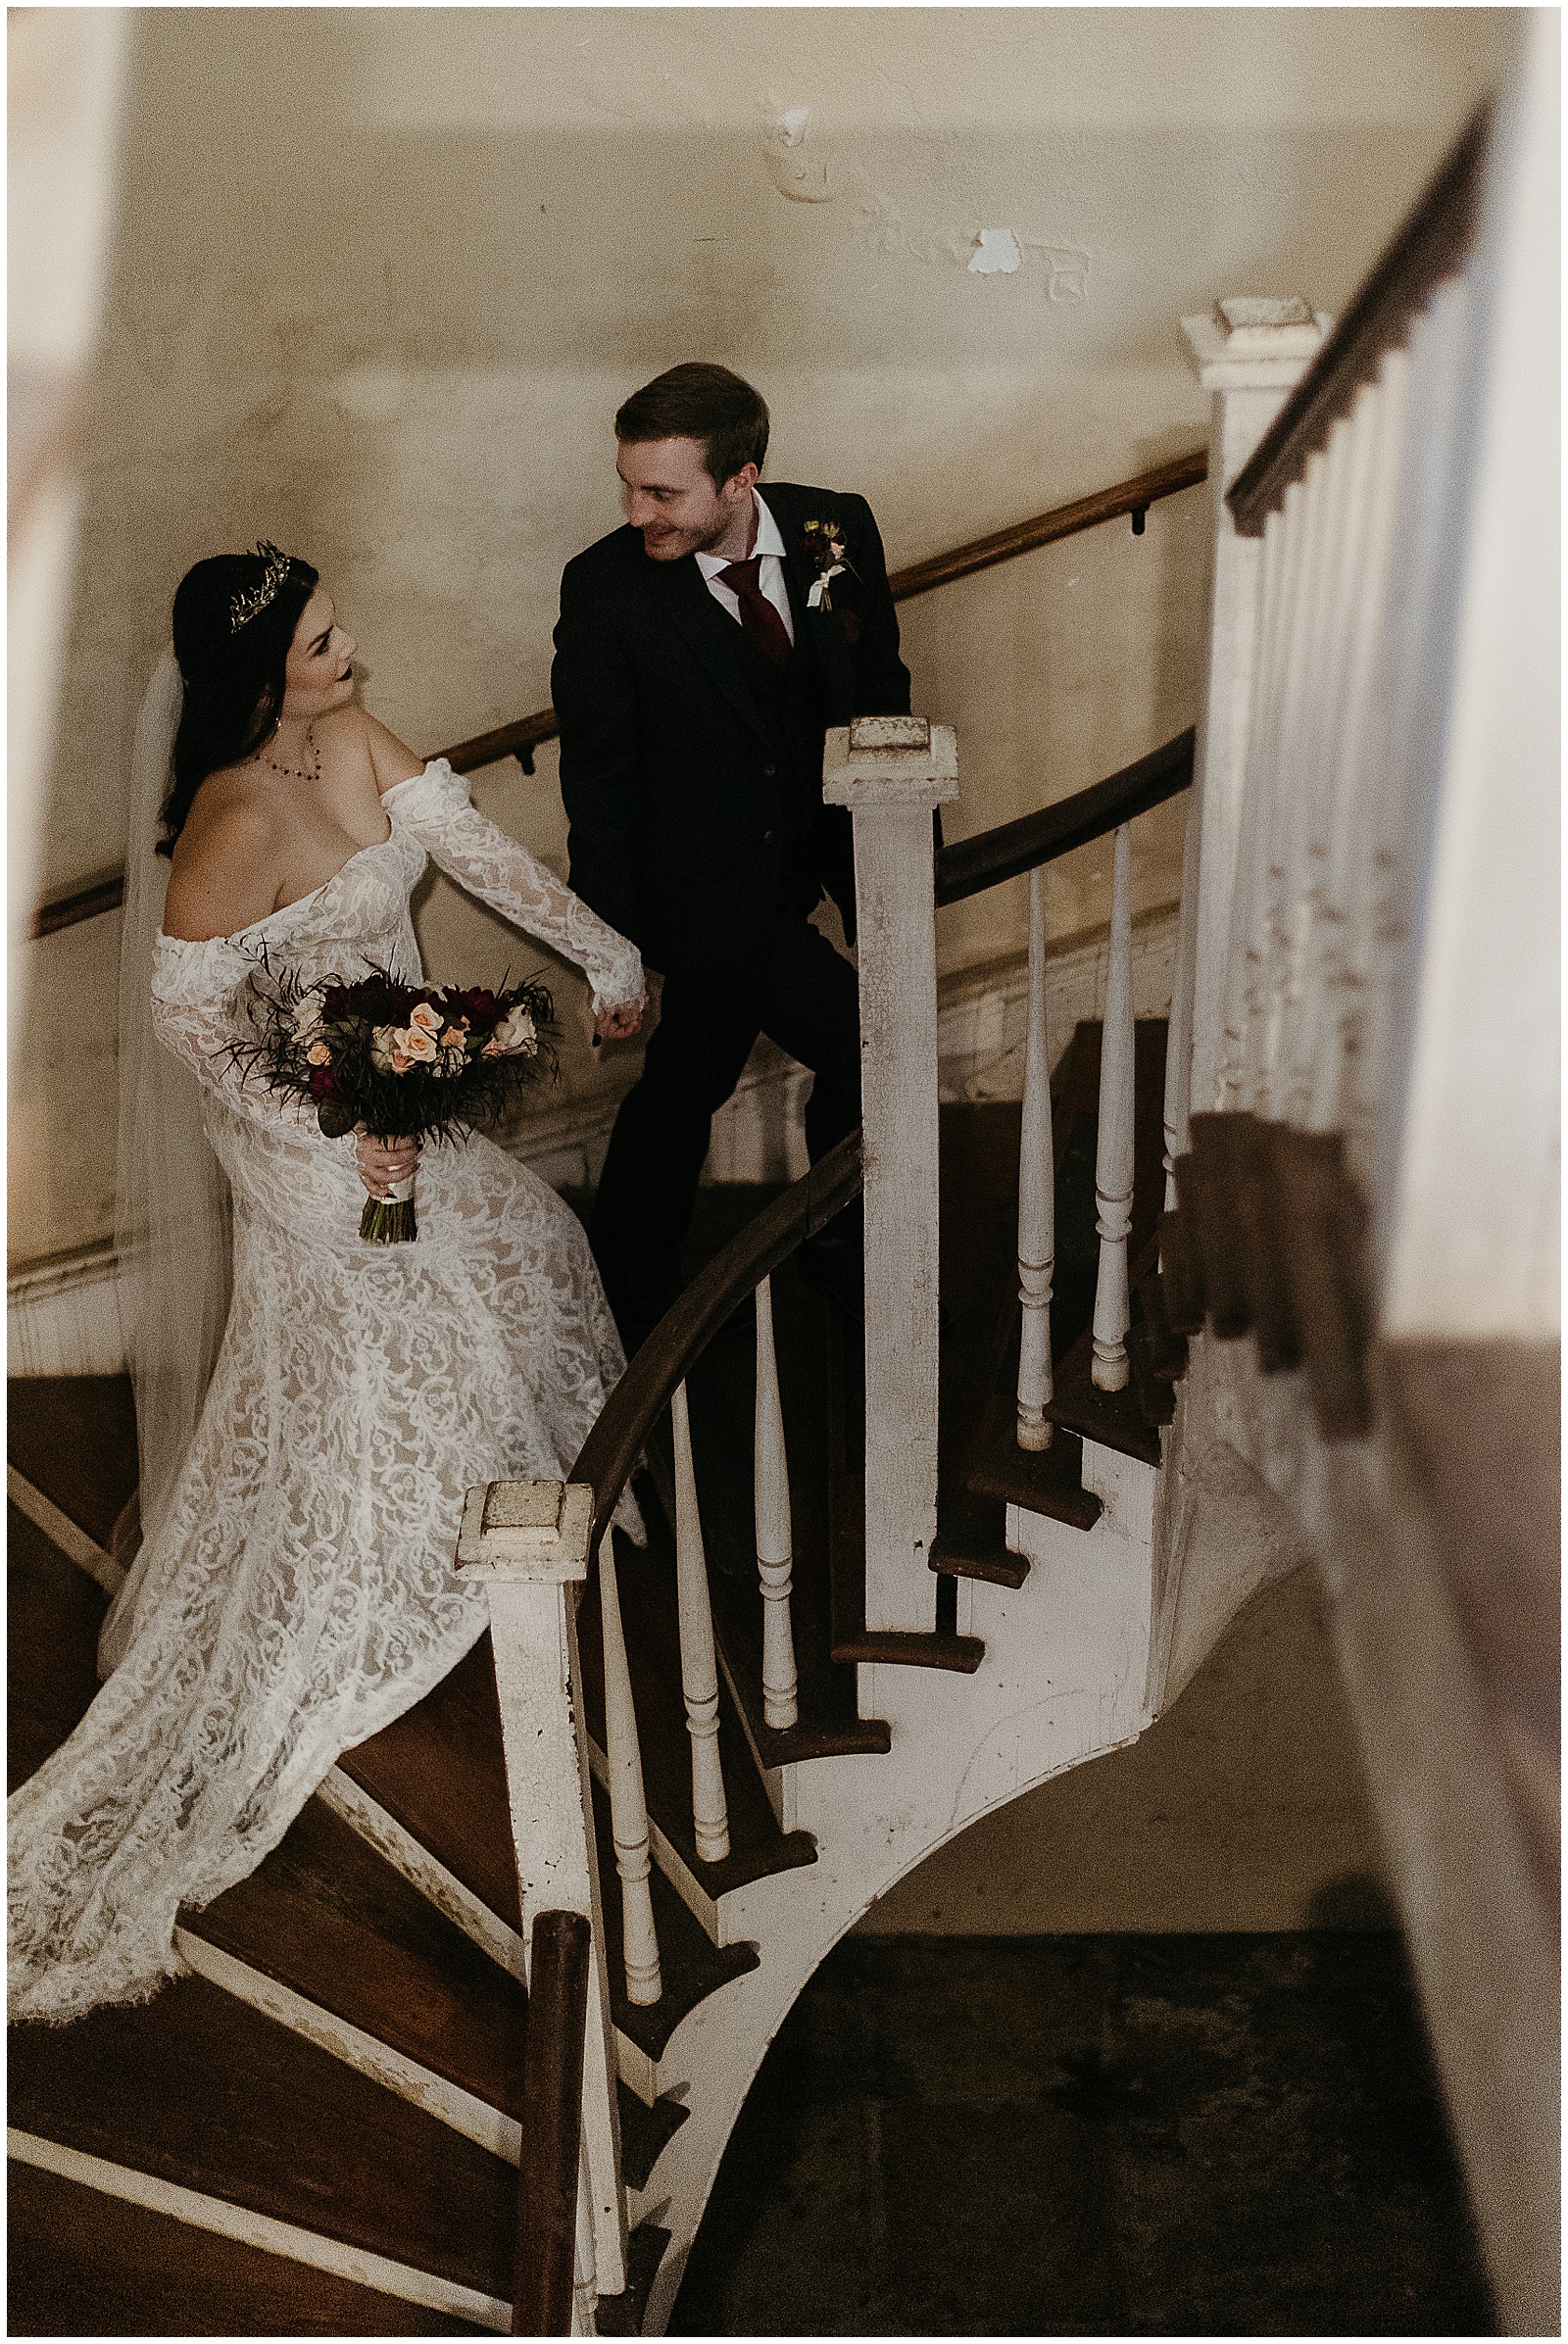 A bride and groom walk up an old staircase towards a gothic wedding.